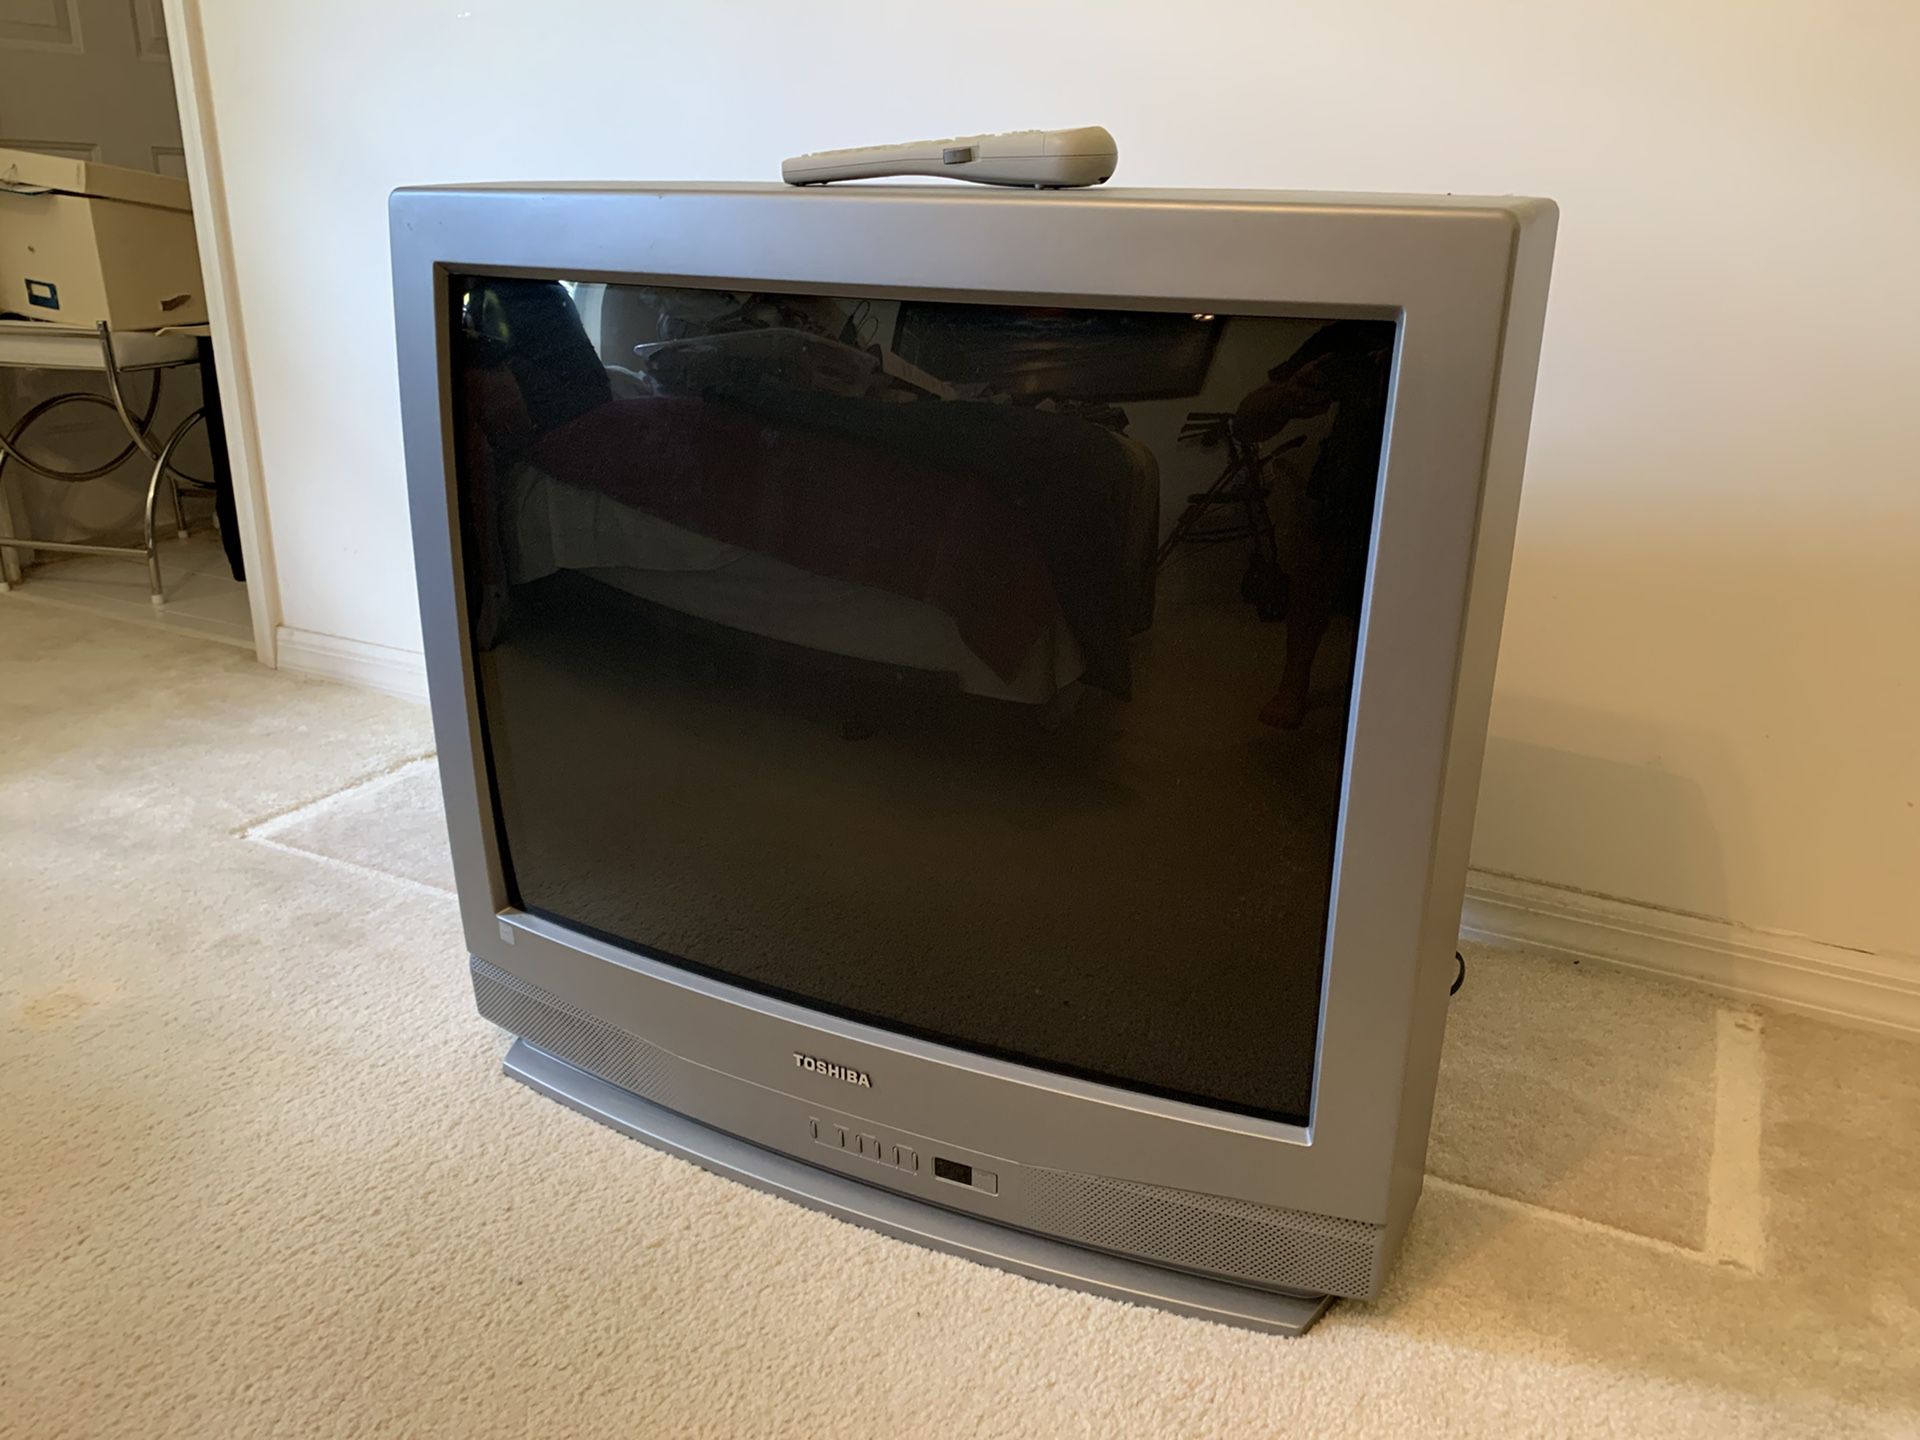 Free Toshiba 32” Stereo TV Model 32A33 with Remote